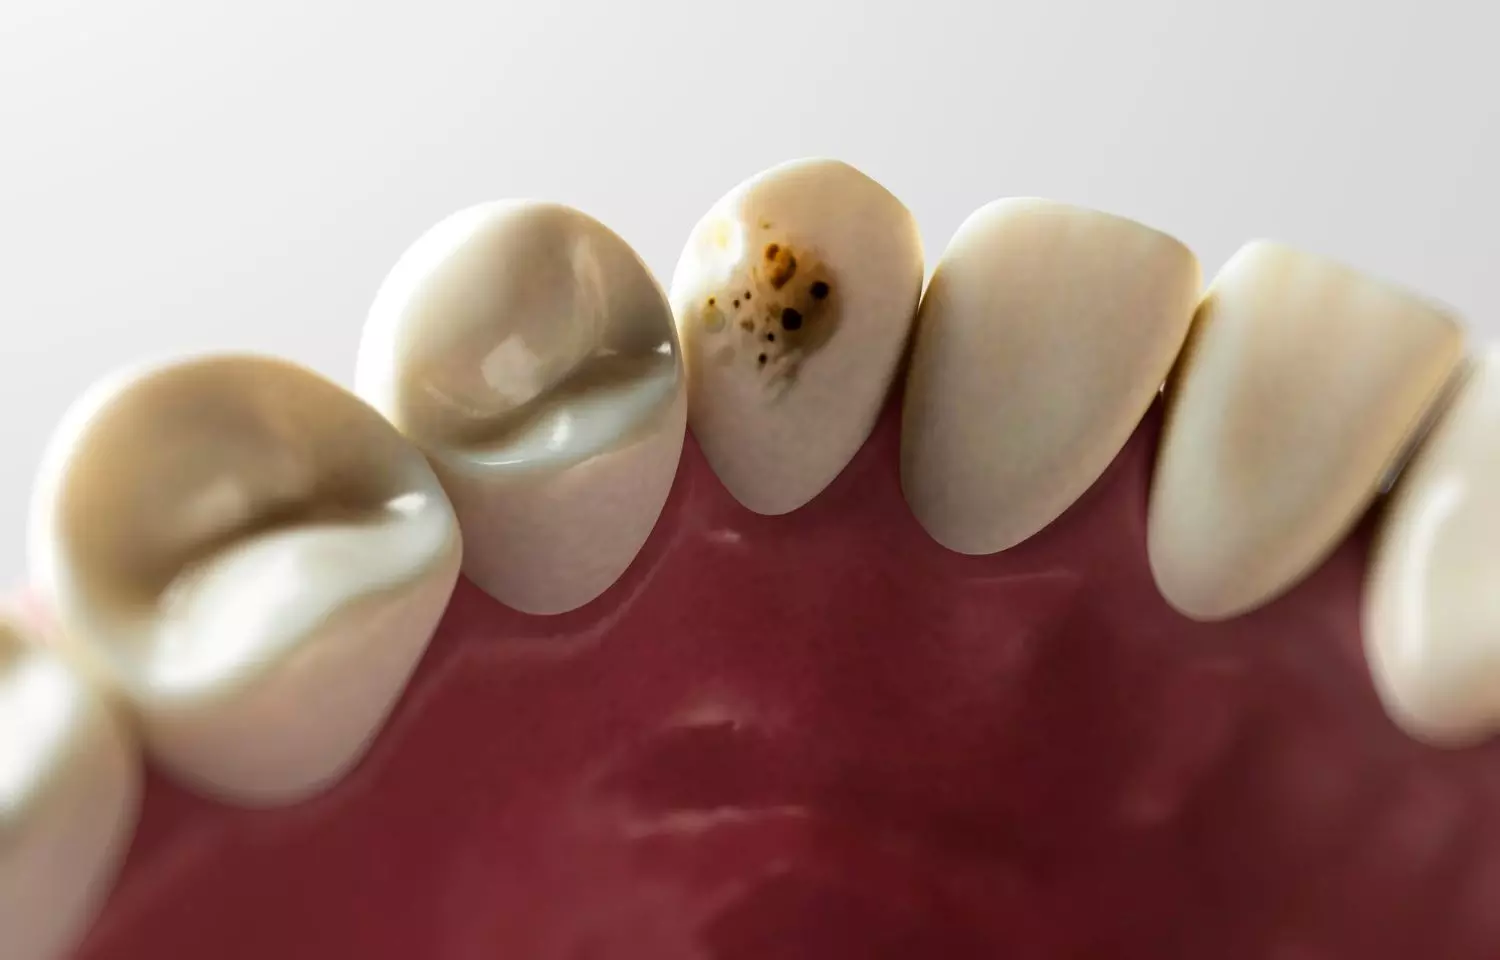 Positive stress may induce good changes in tooth stem cells to boost tooth tissue regeneration